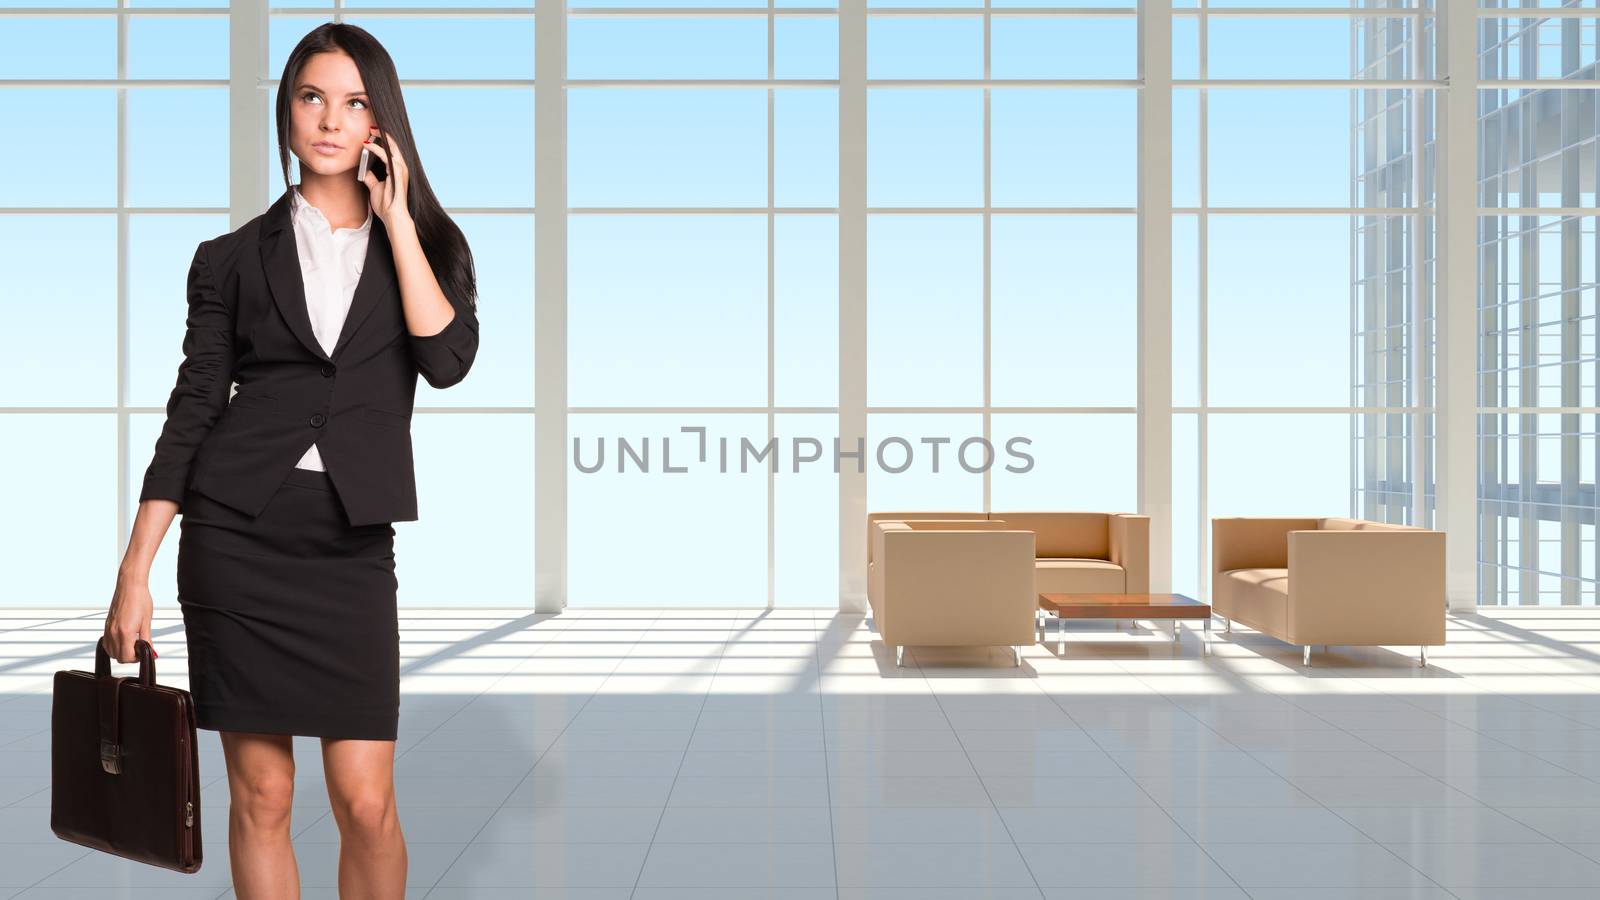 Businesswoman holding brifecase and using phone. Large window in office building as background